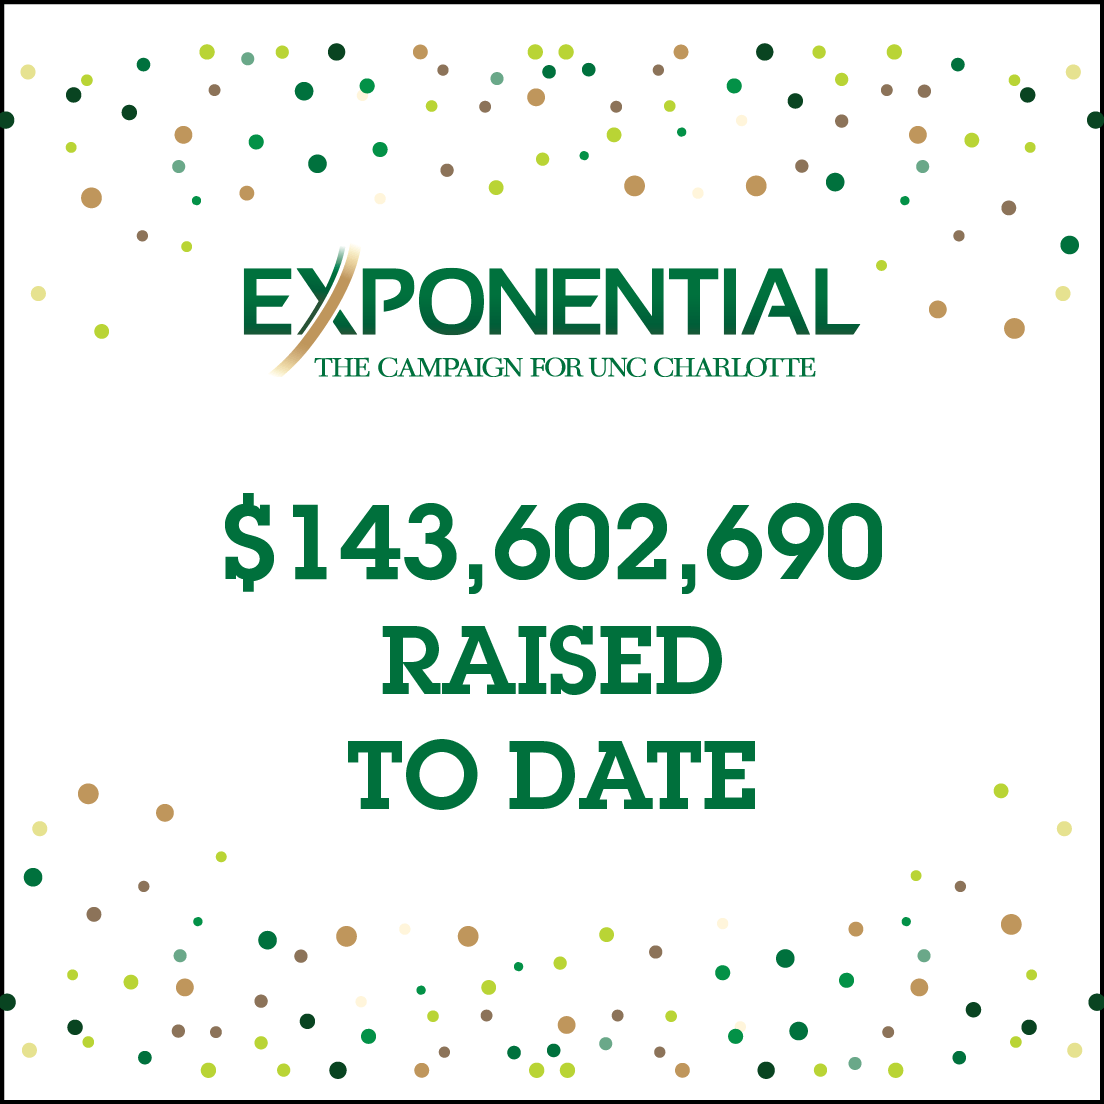 Exponential: The Campaign for UNC Charlotte  $143,602,690 raised to date